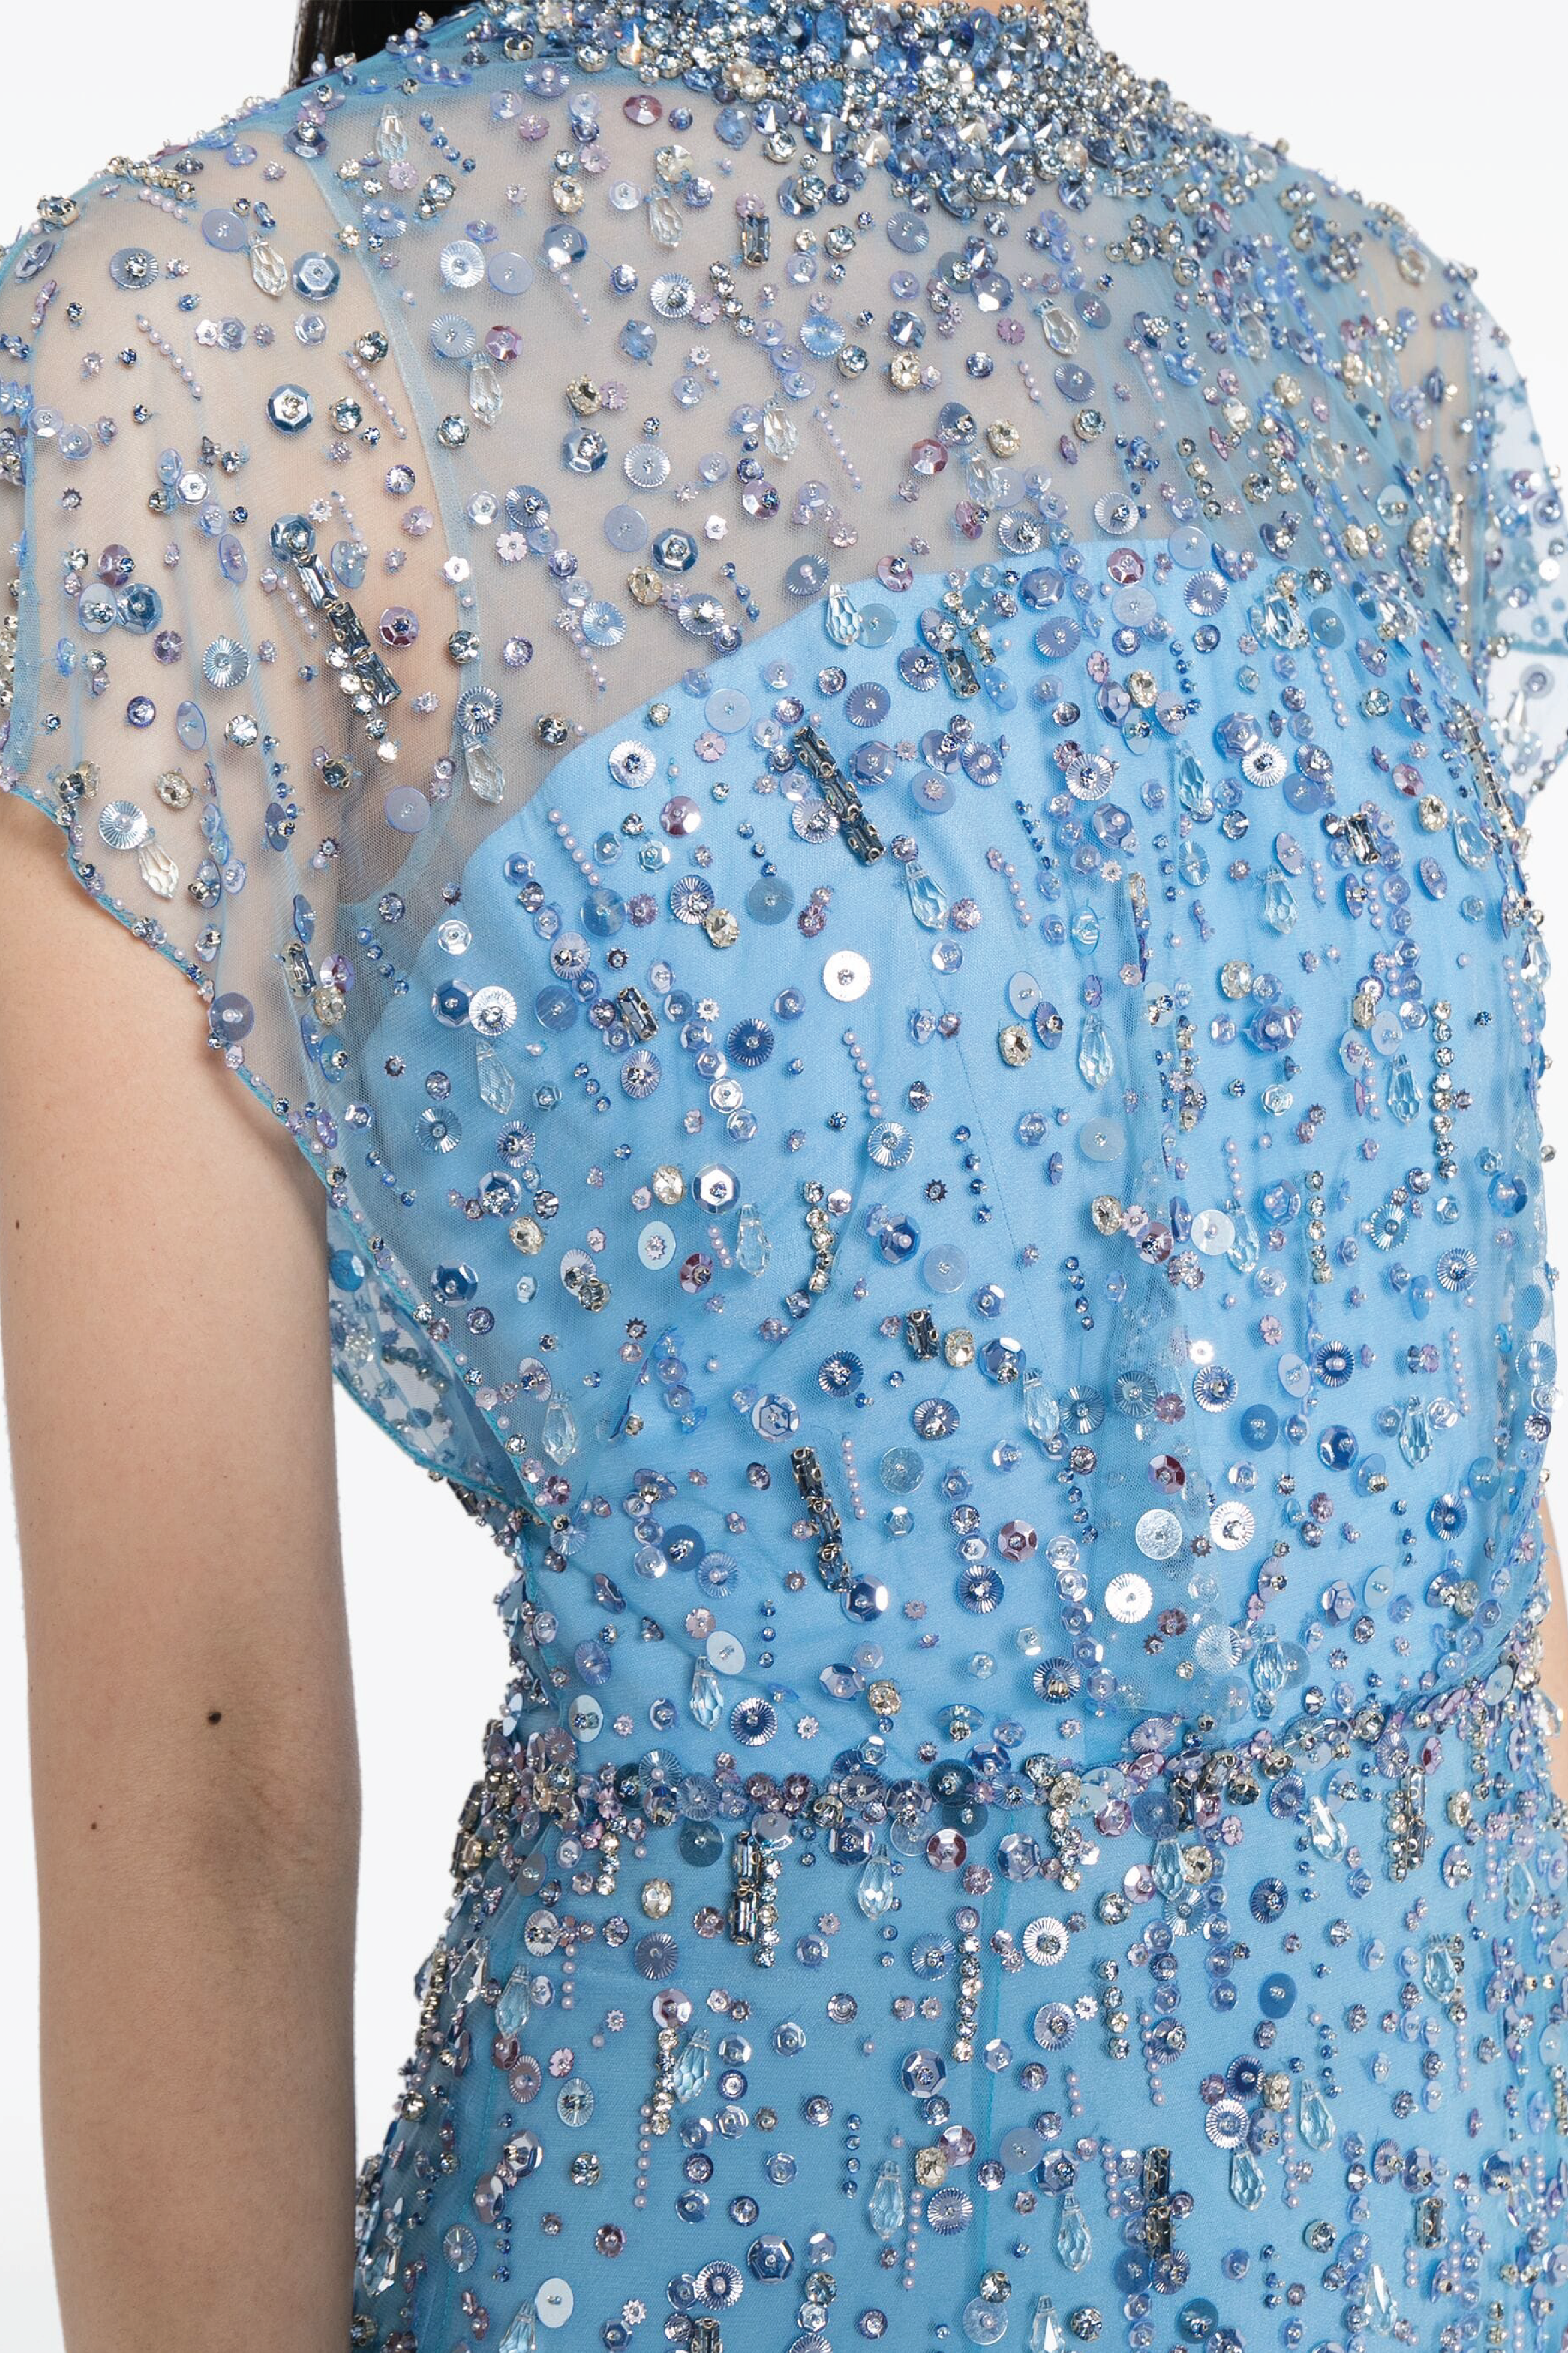 Crystal Drop Sequin-Embellished Gown